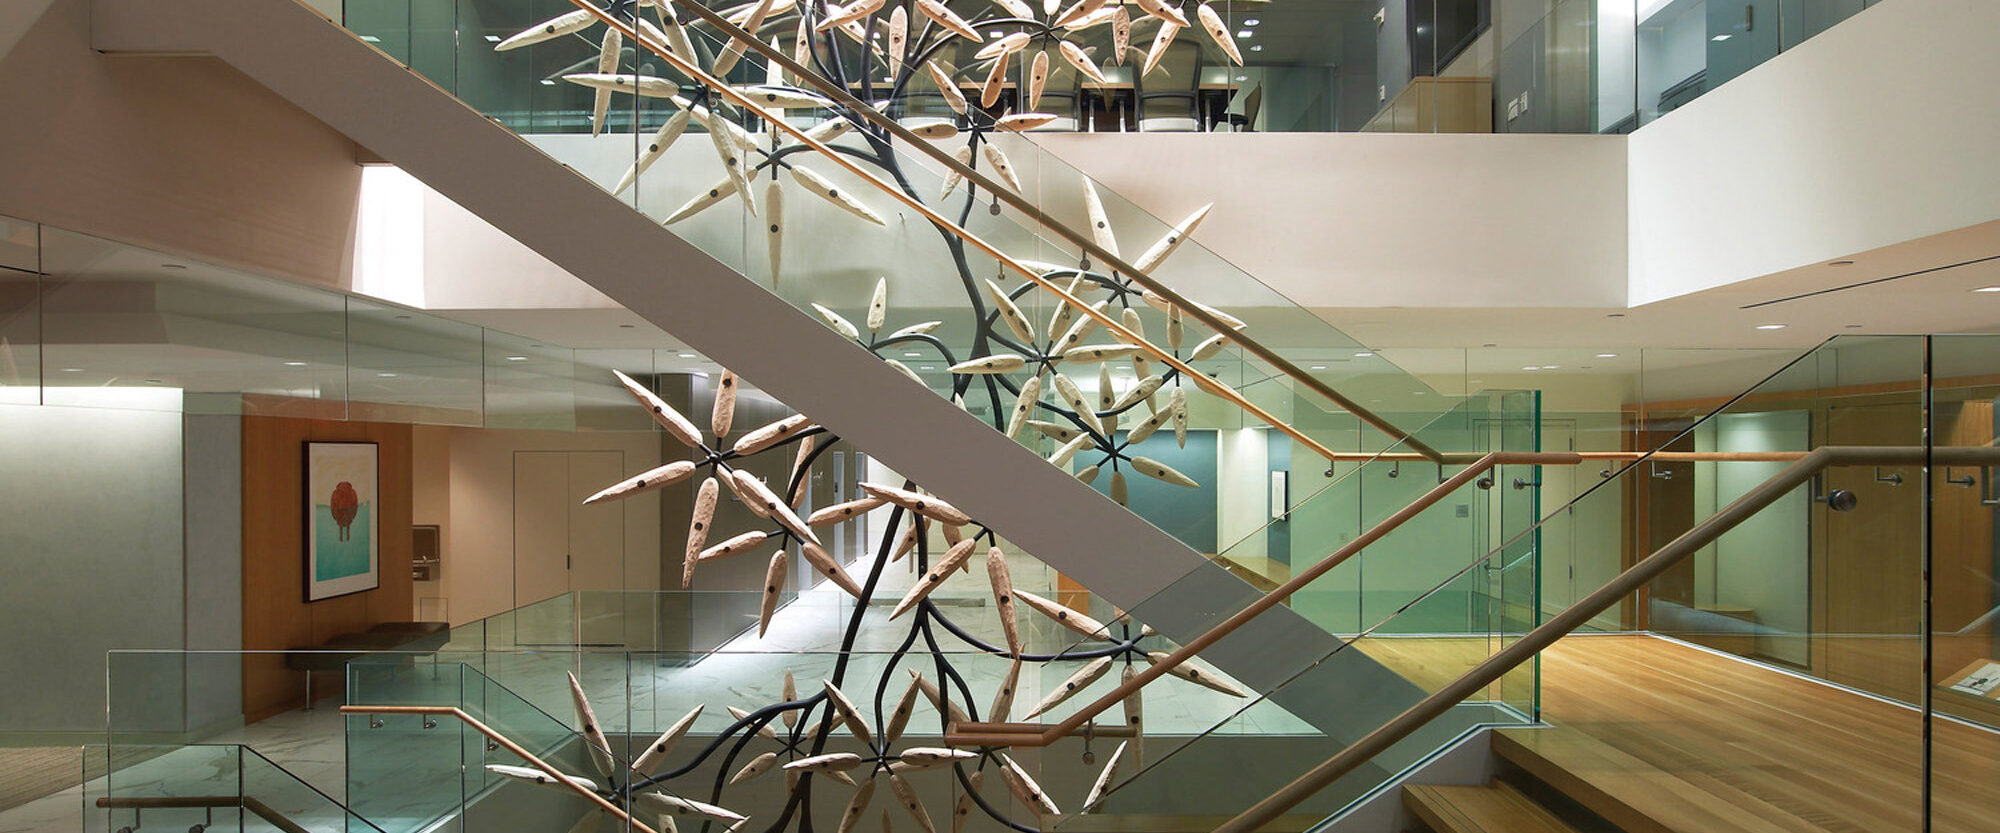 Modern office lobby featuring sleek wood stairs, glass balustrades, and an abstract metallic chandelier evoking a dynamic burst of stars, enhancing the space with a blend of natural materials and contemporary artistry.